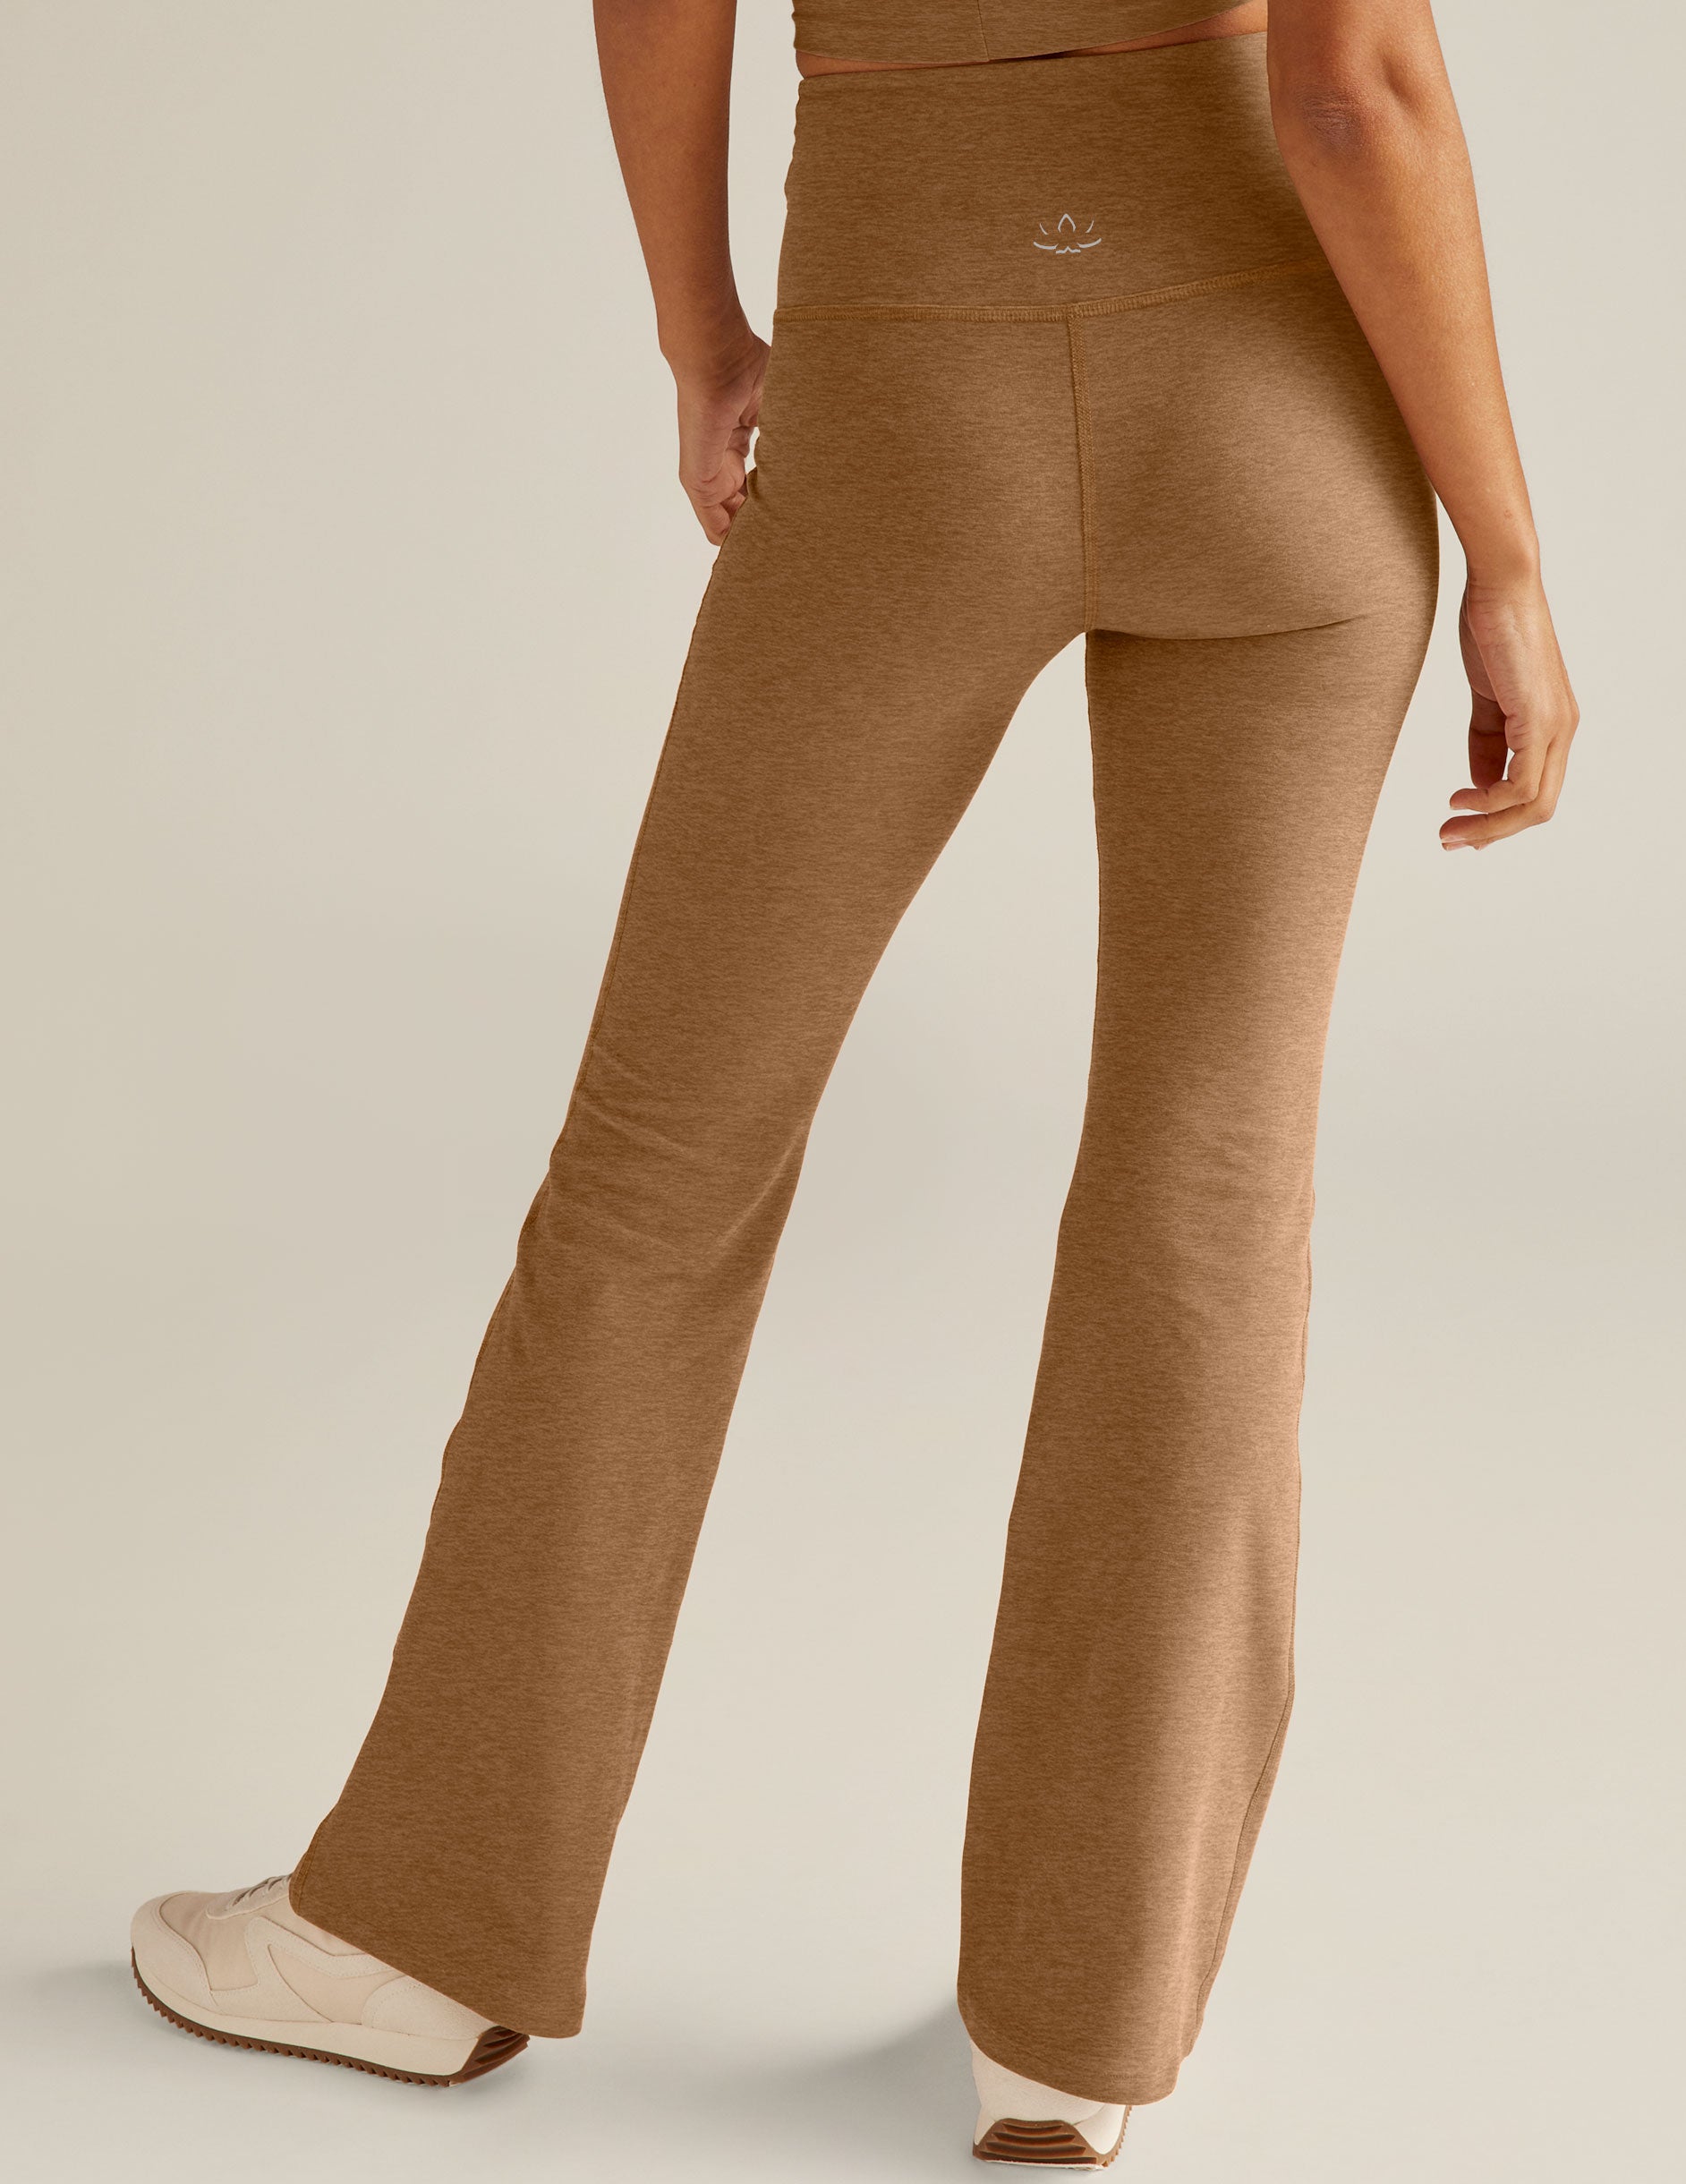 brown high-waisted flare leggings with a crossover detailing on the front waistband.